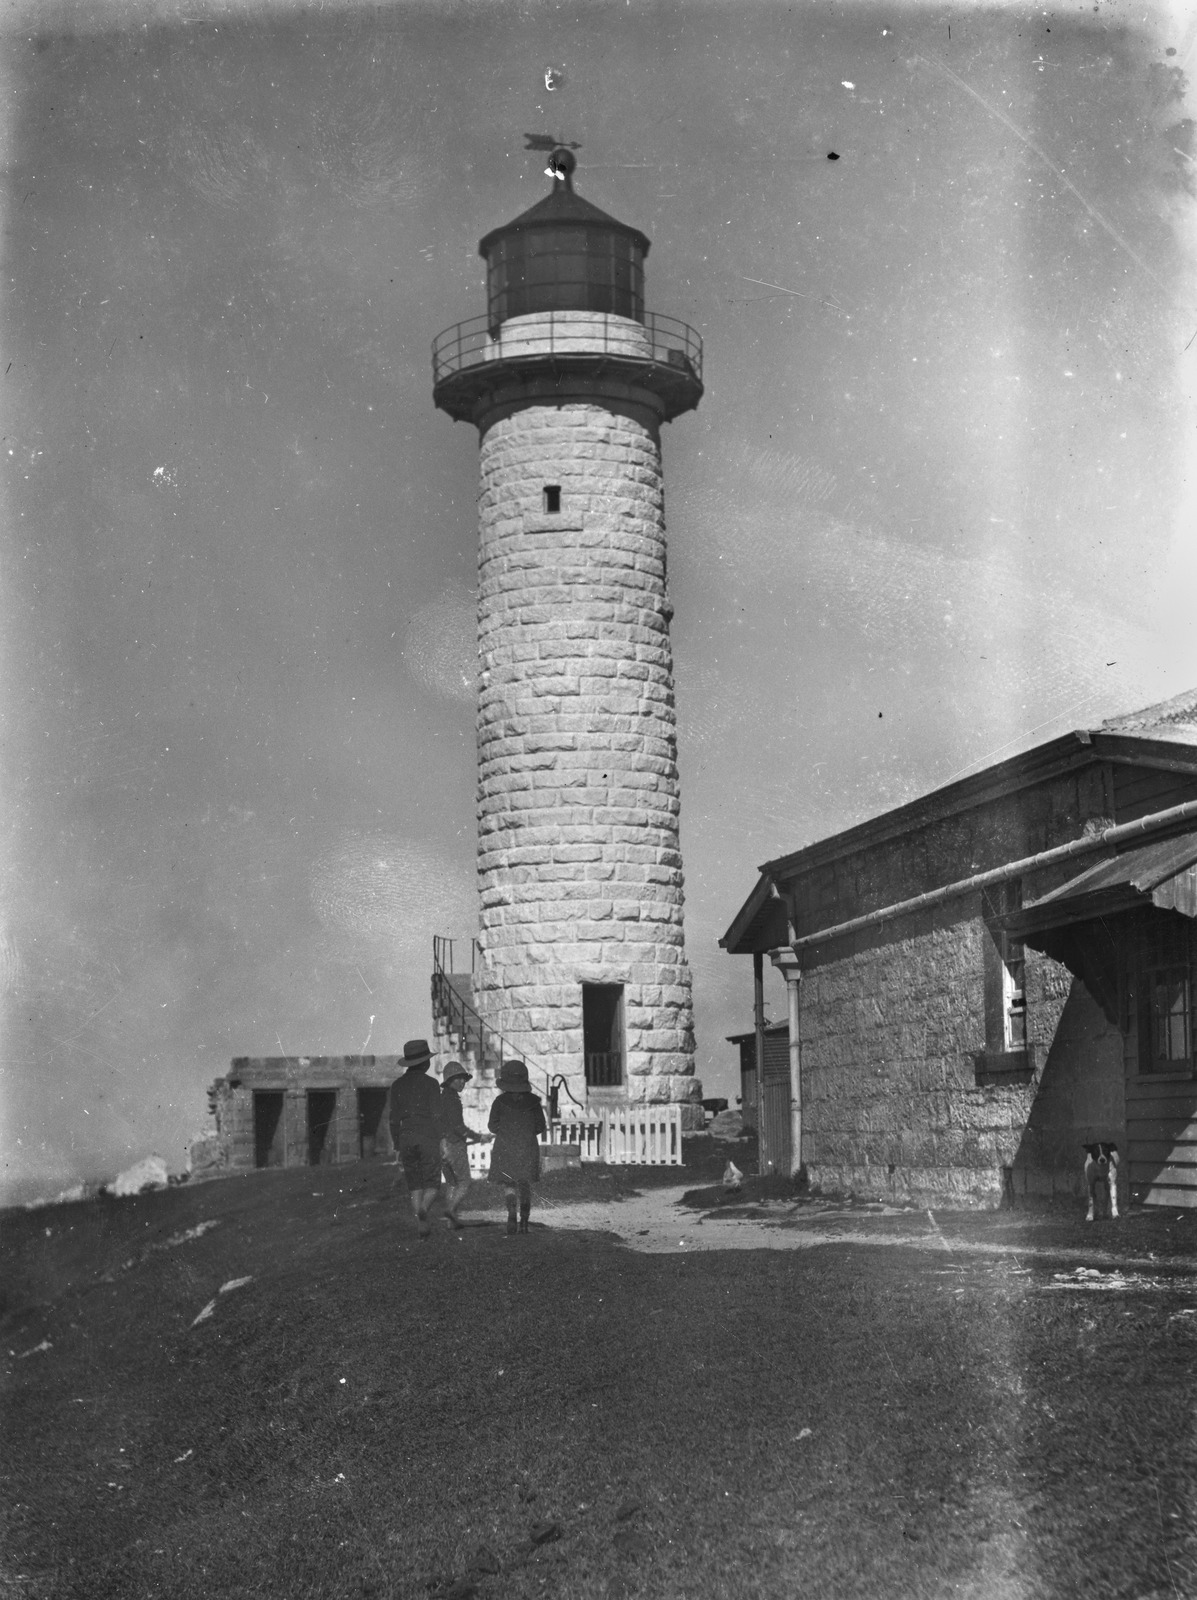 Three young children playing in the shadows of Cape Moreton Lighthouse, Moreton Island, ca. 1912